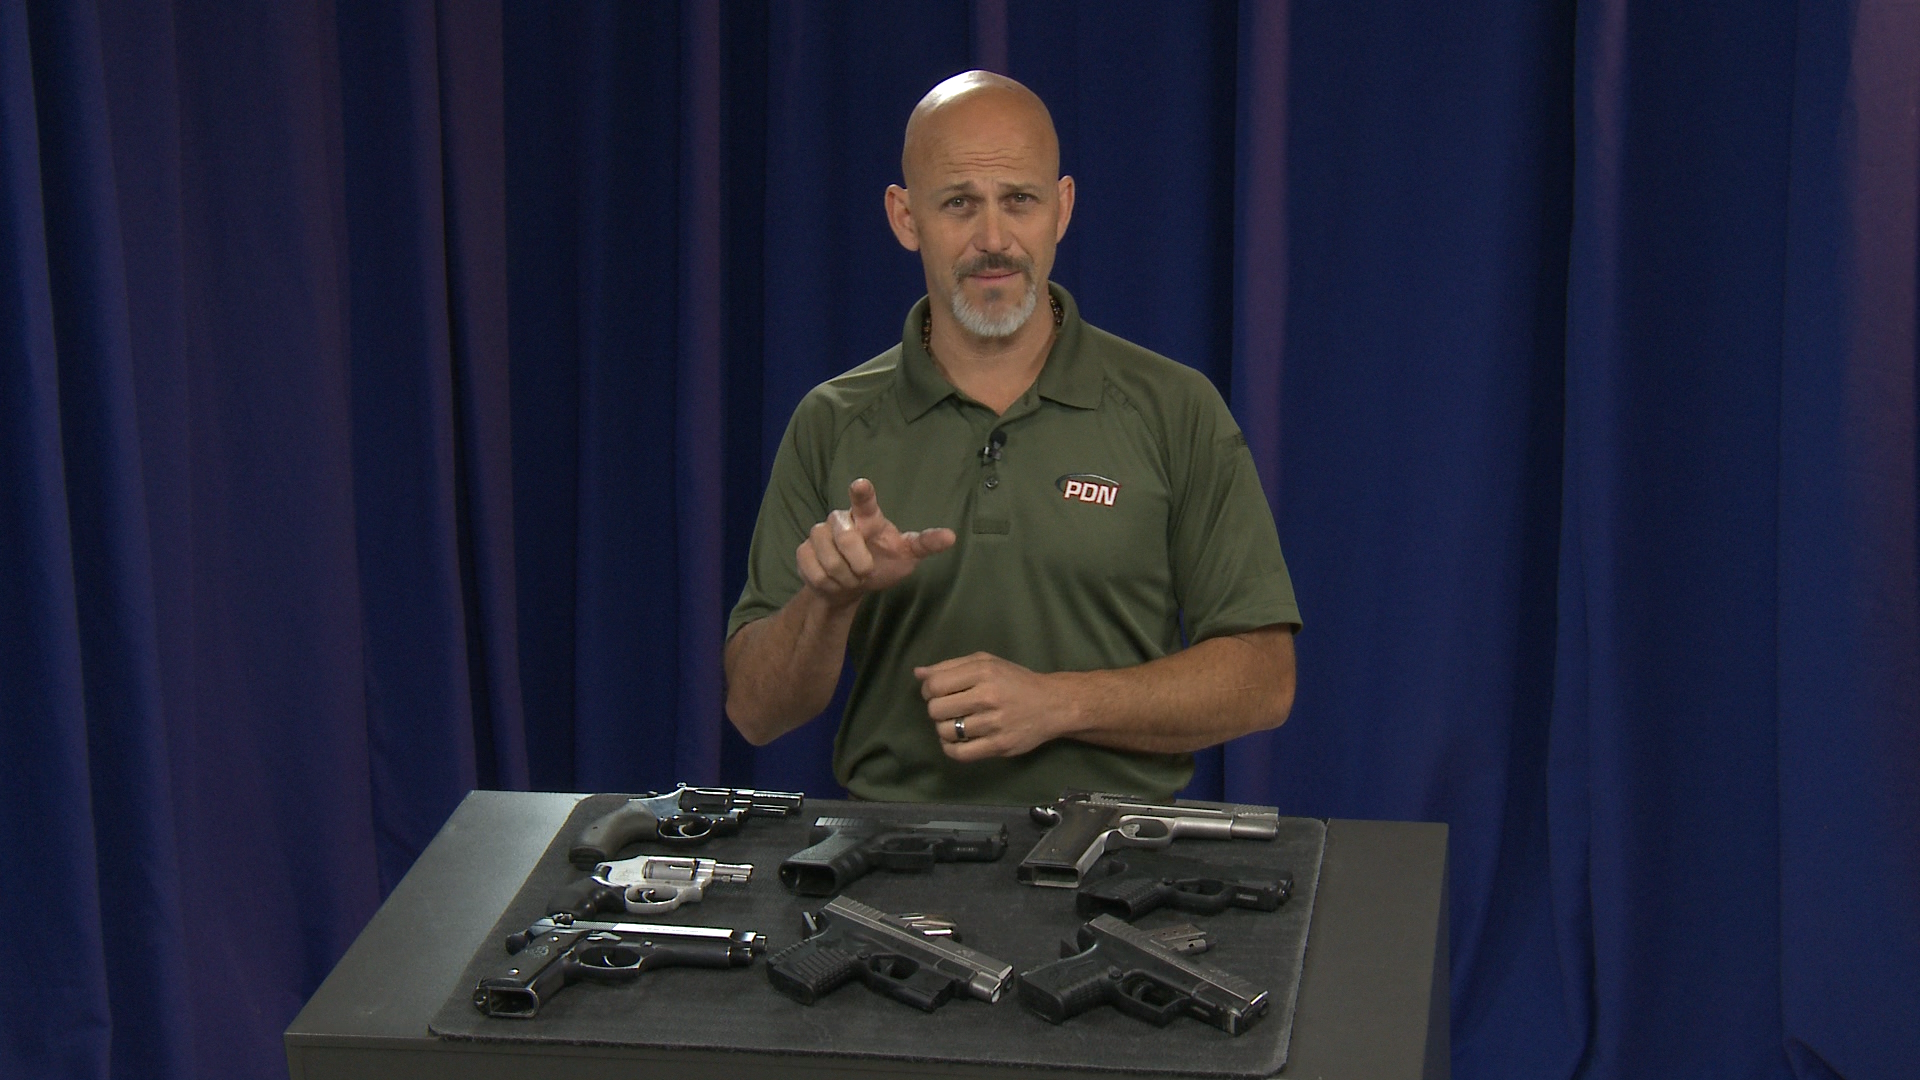 Session 1: How to Select a Defensive Handgun